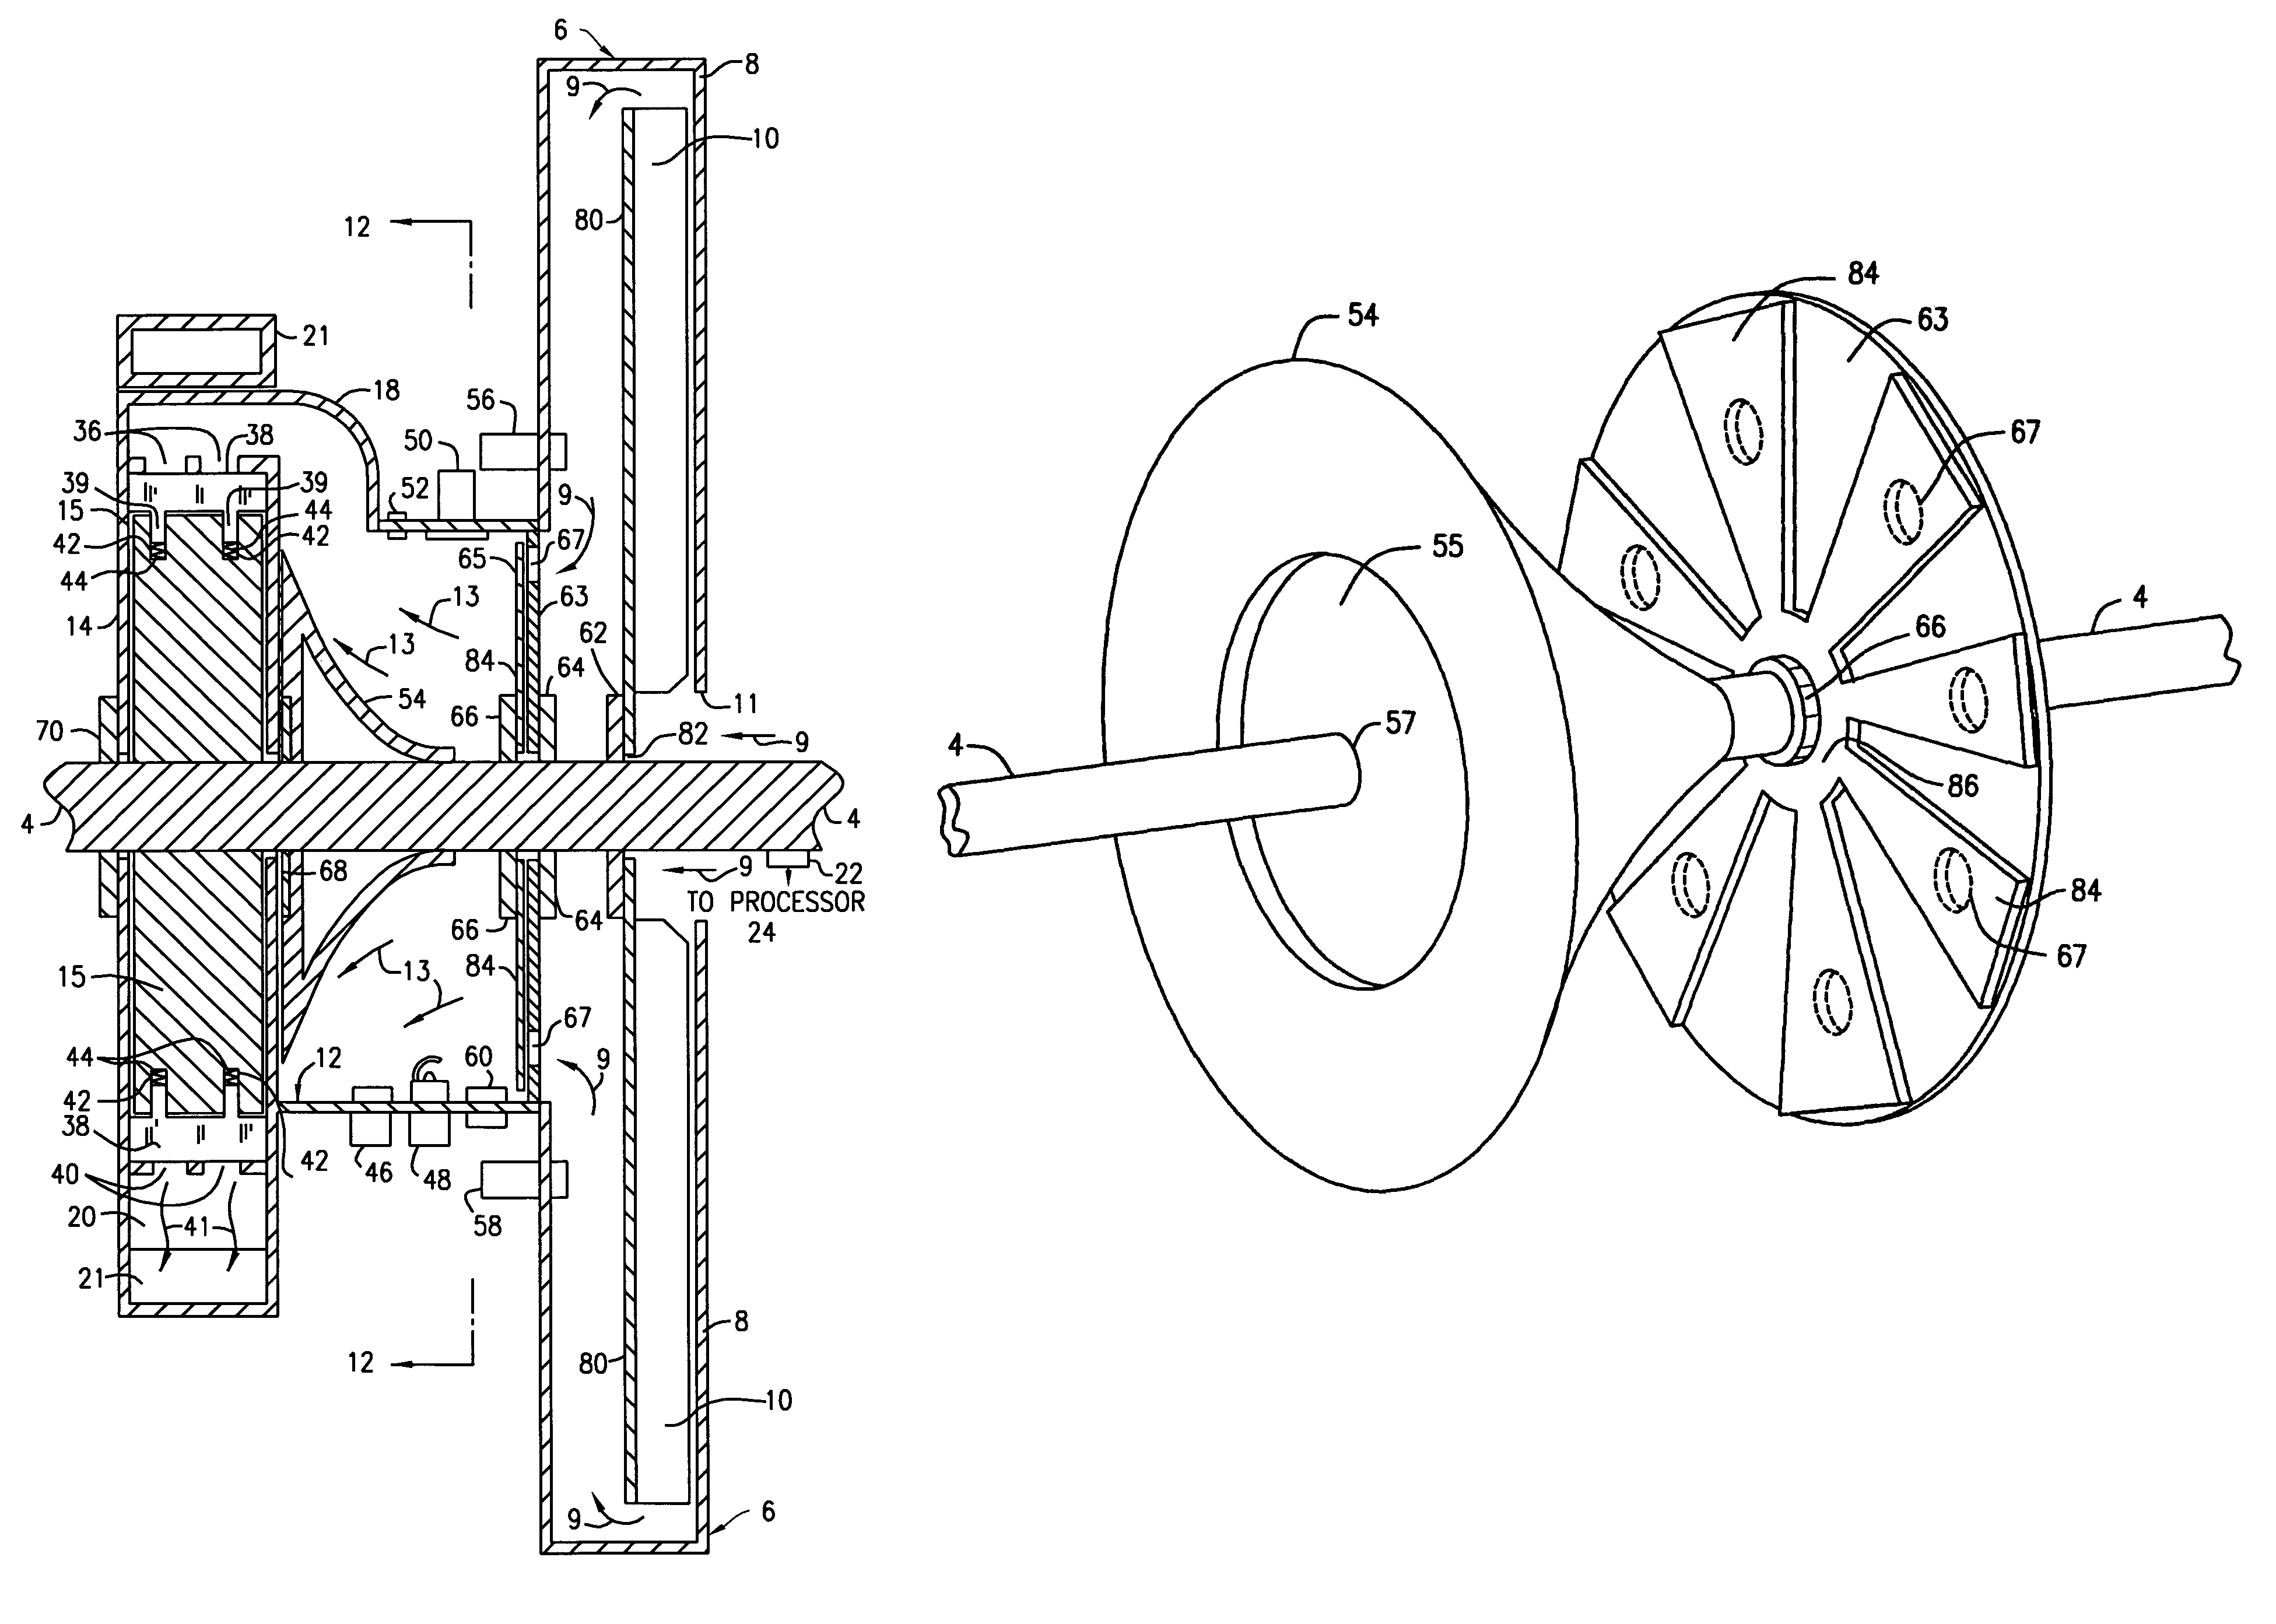 High Efficiency rotary piston combustion engine